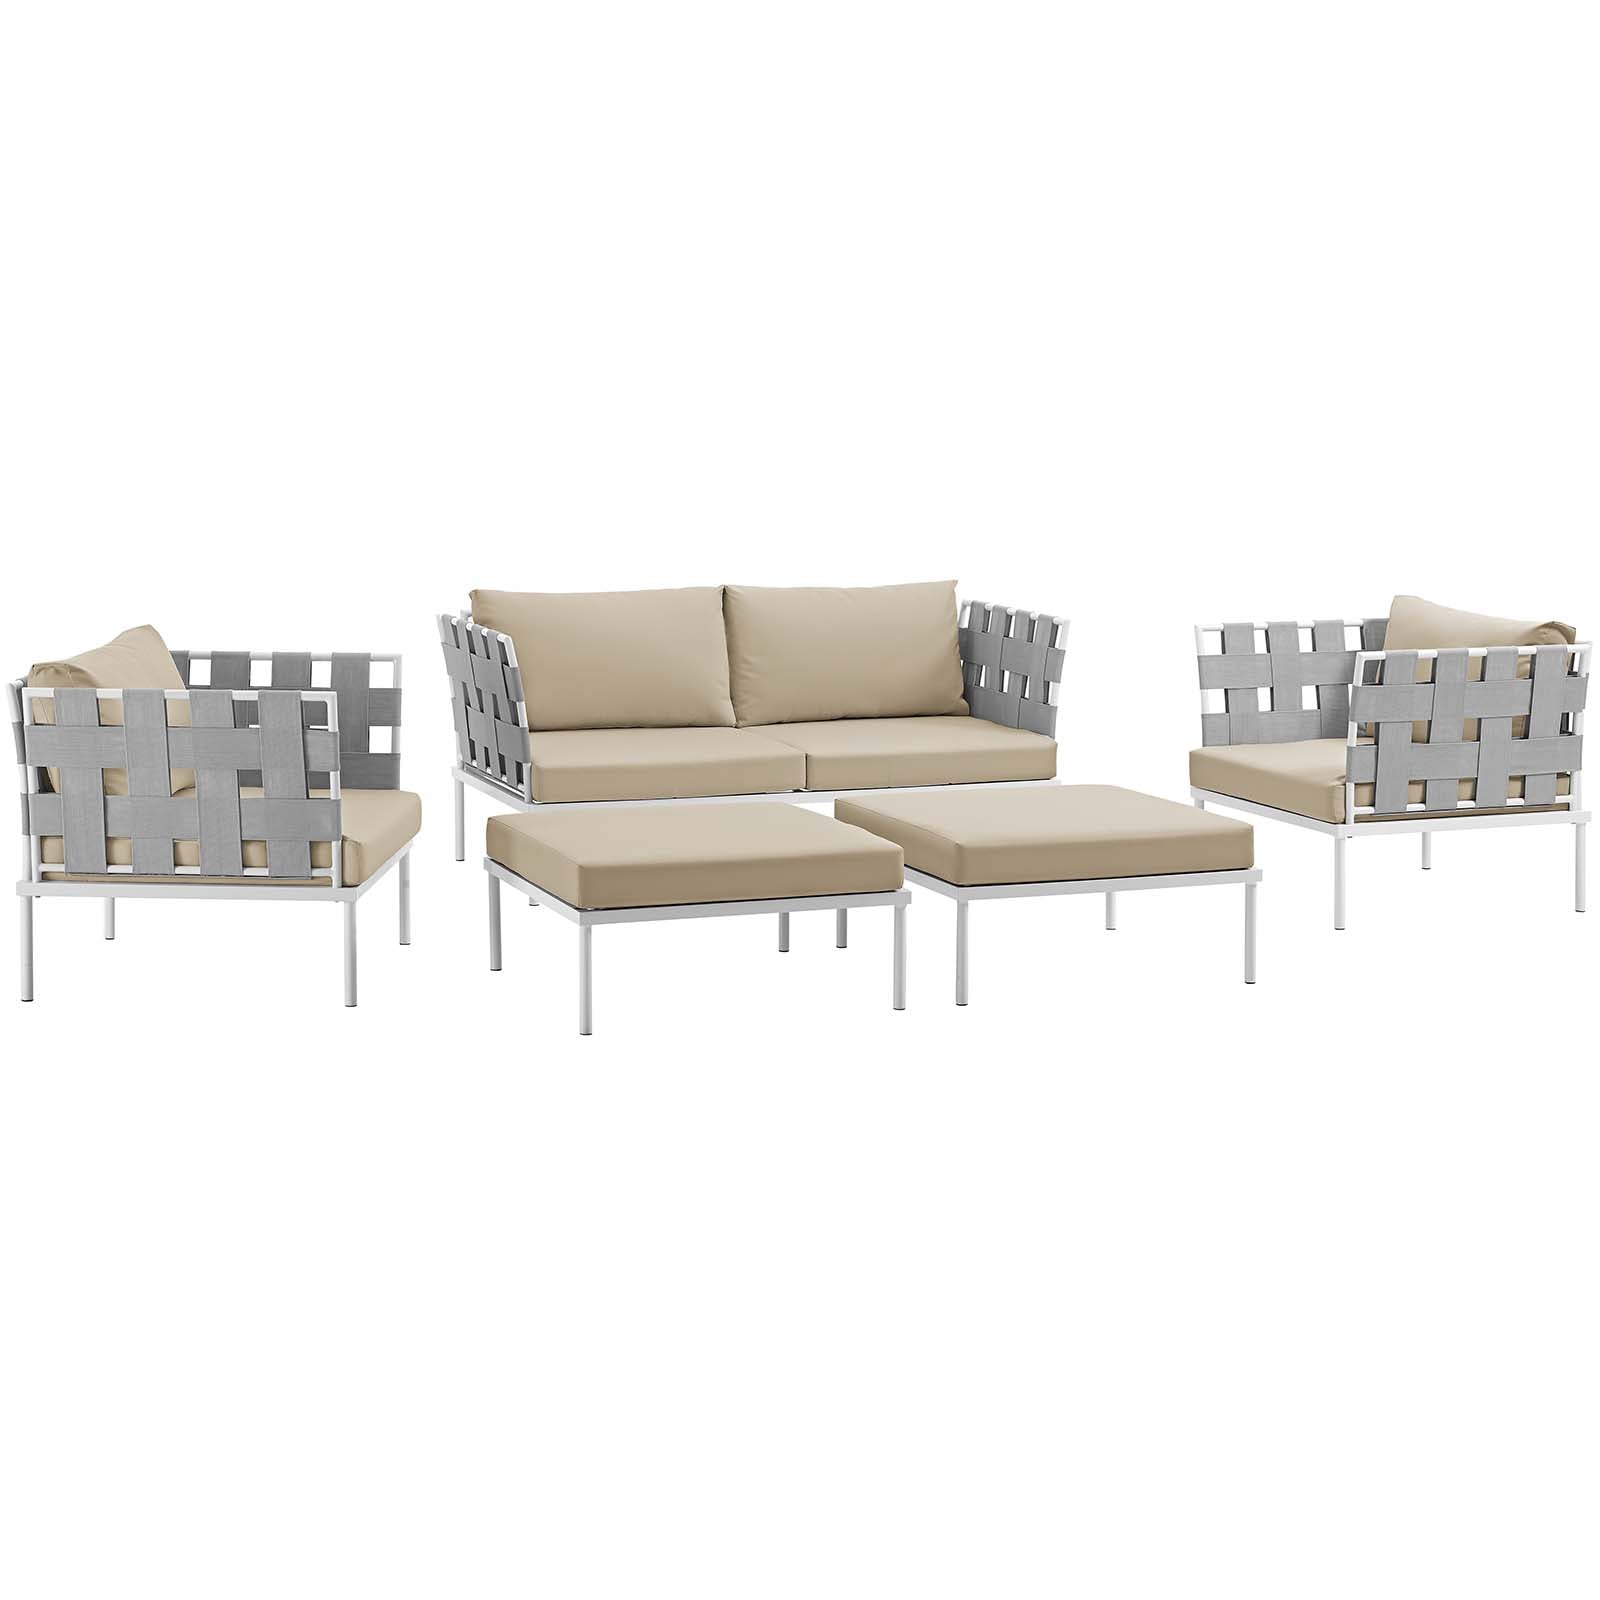 Modway Outdoor Conversation Sets - Harmony 5 Piece Outdoor 131"W Patio Aluminum Sectional Sofa Set Whit